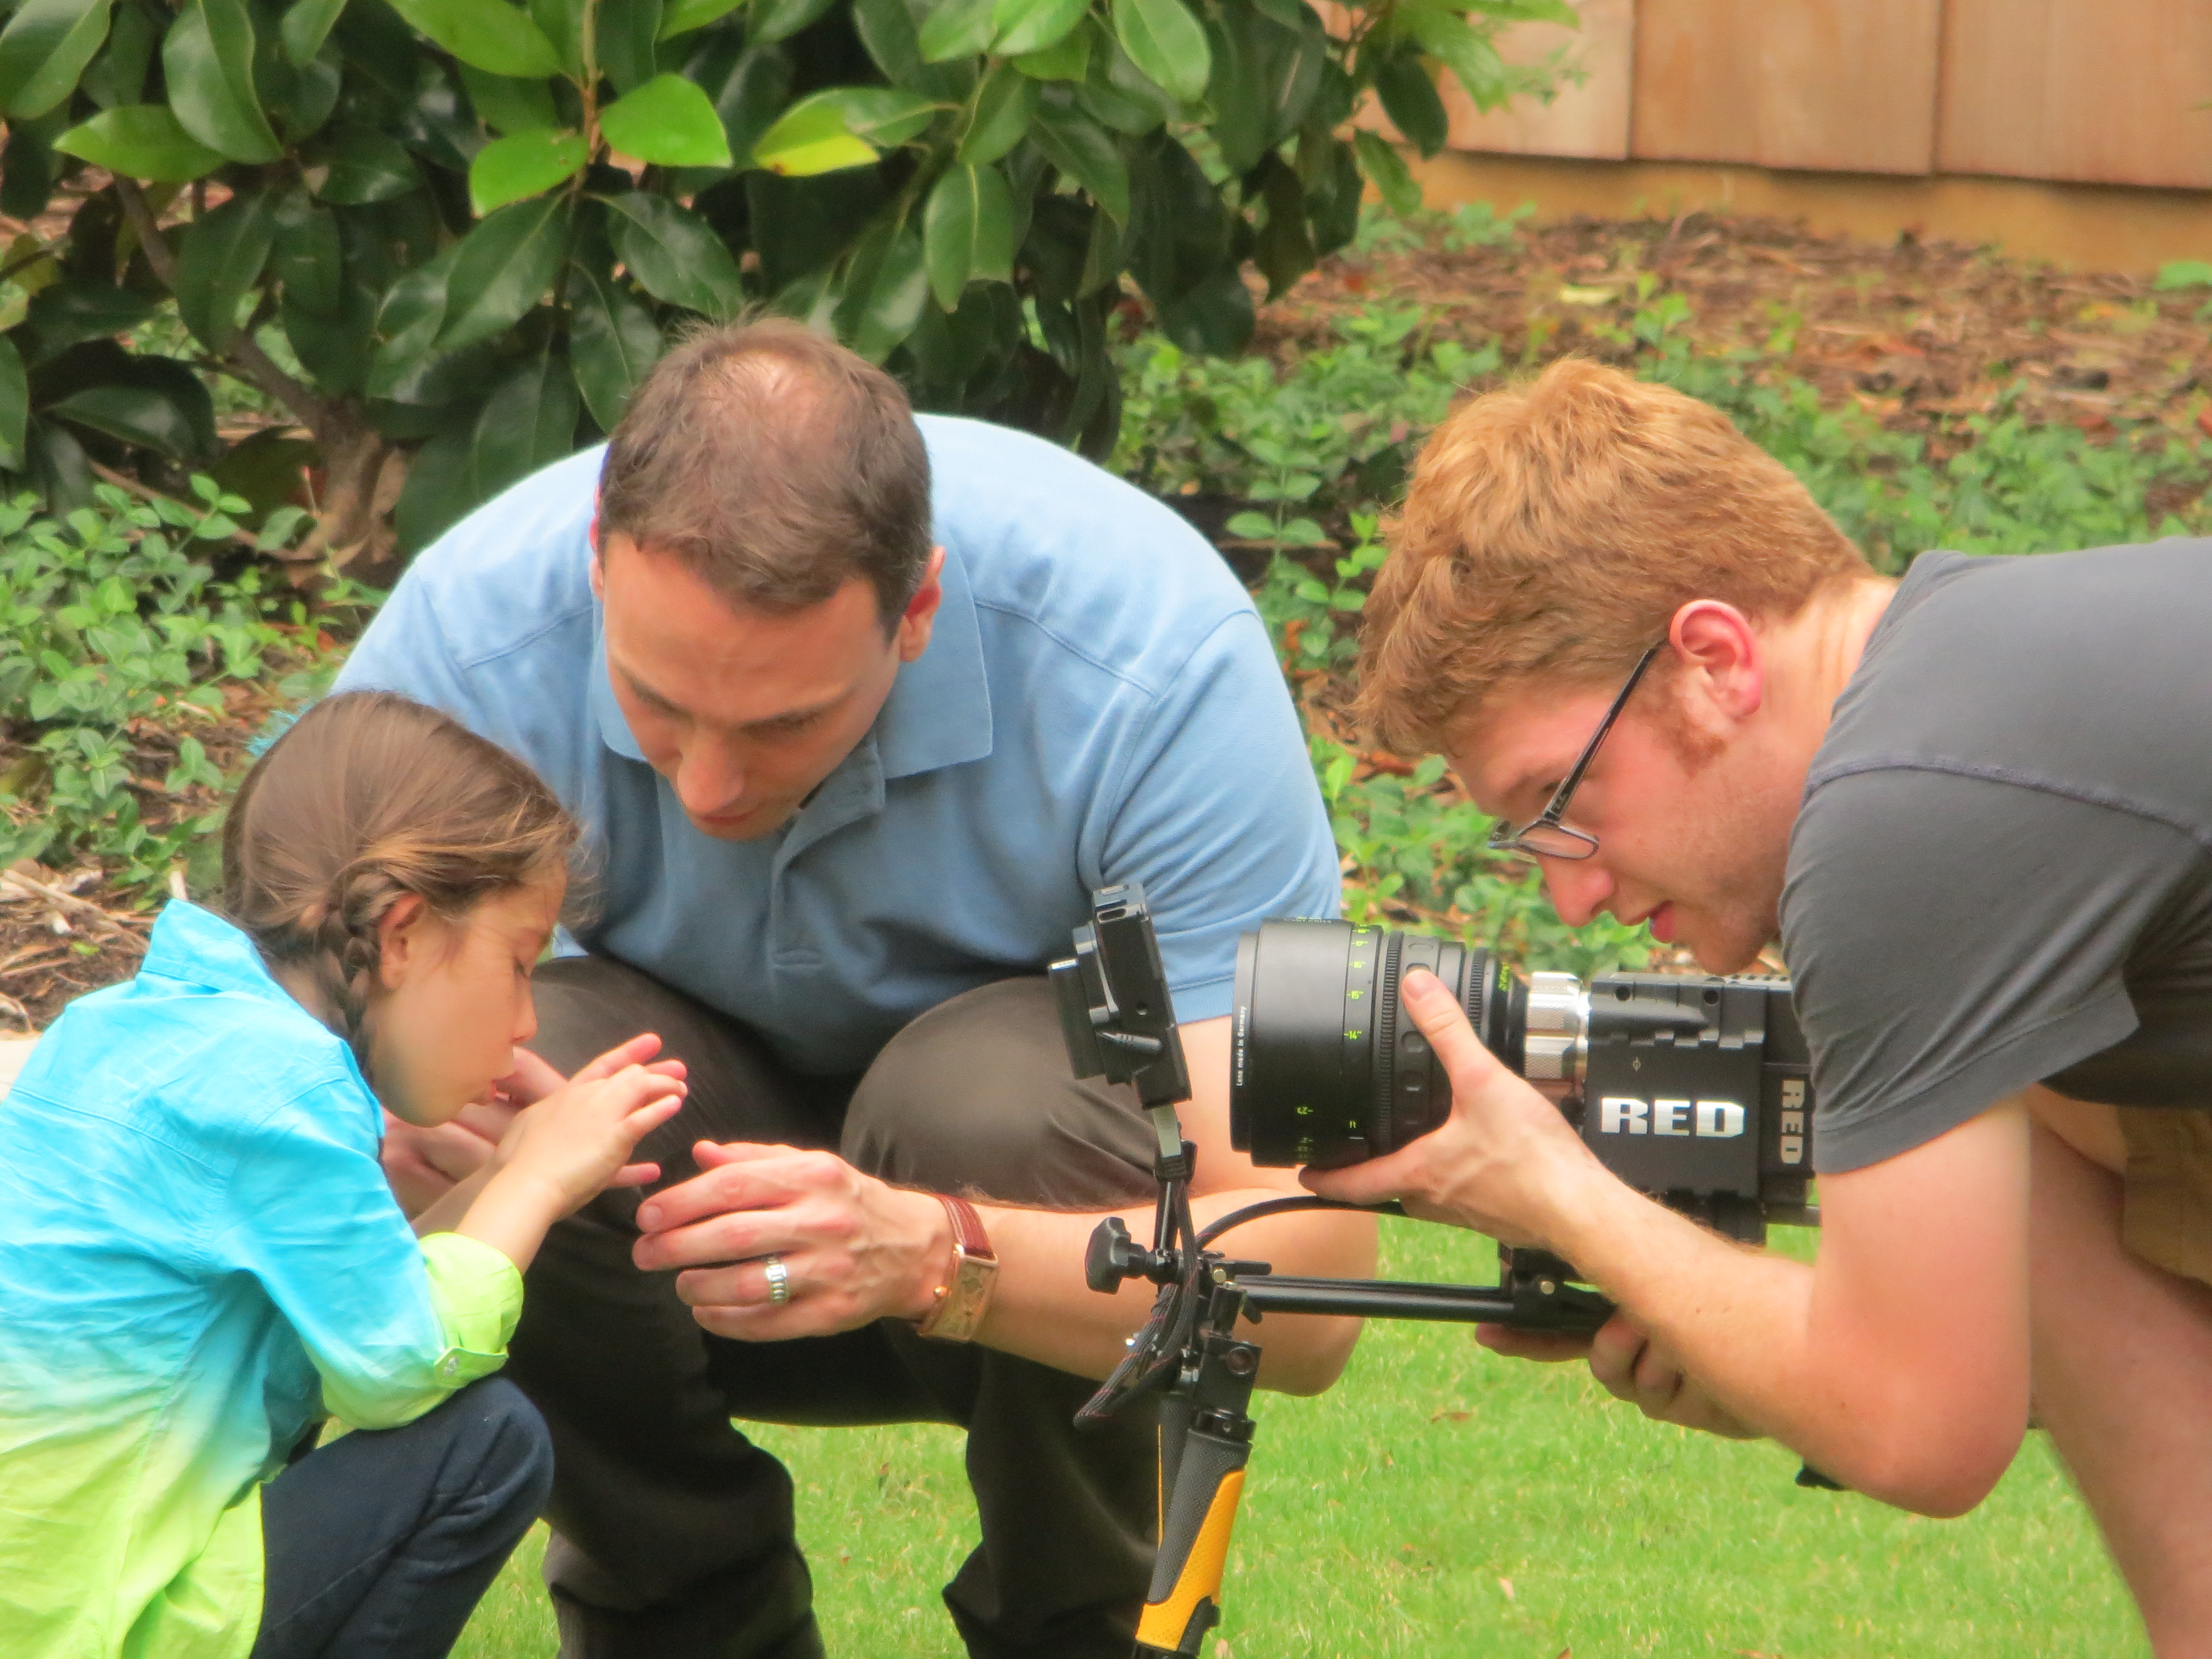 Kelsey and cast Dad filming The Traveler, a 168 film project that made it to top 22 finalist in L.A.